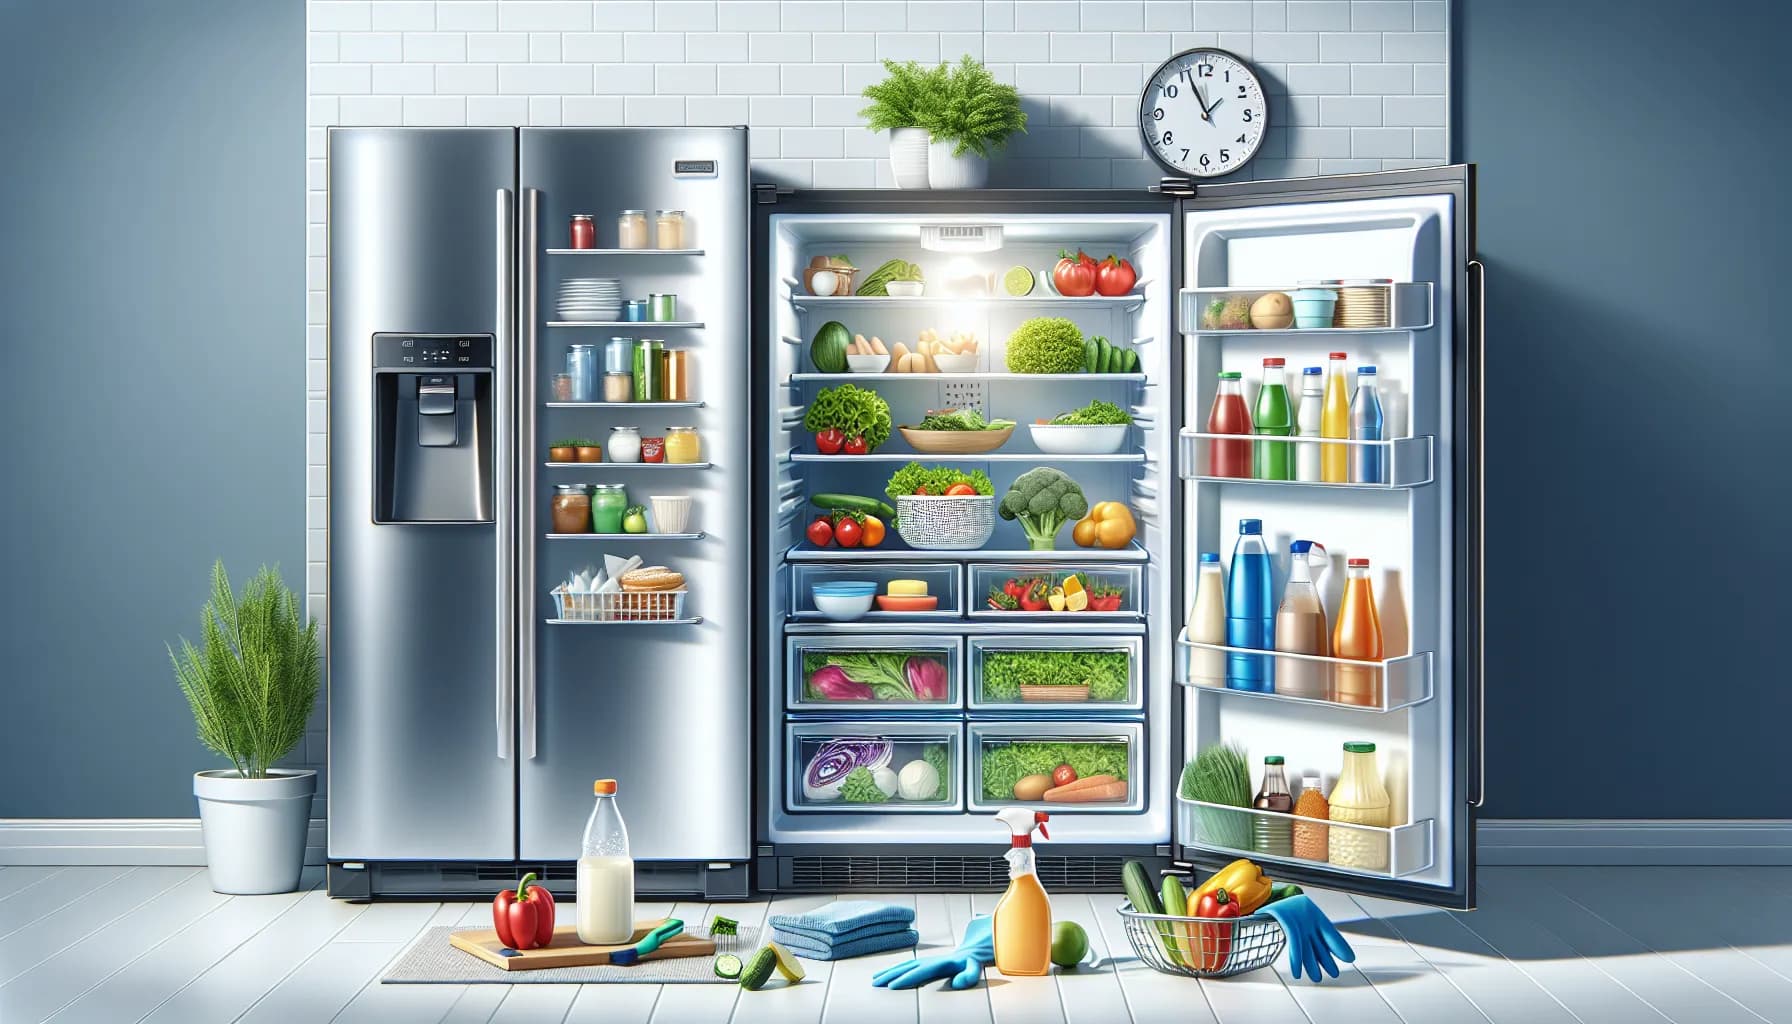 Clean, organized fridge with fresh food, beverages, and cleaning tools. Clock shows one hour. 10 steps to thoroughly clean your fridge.